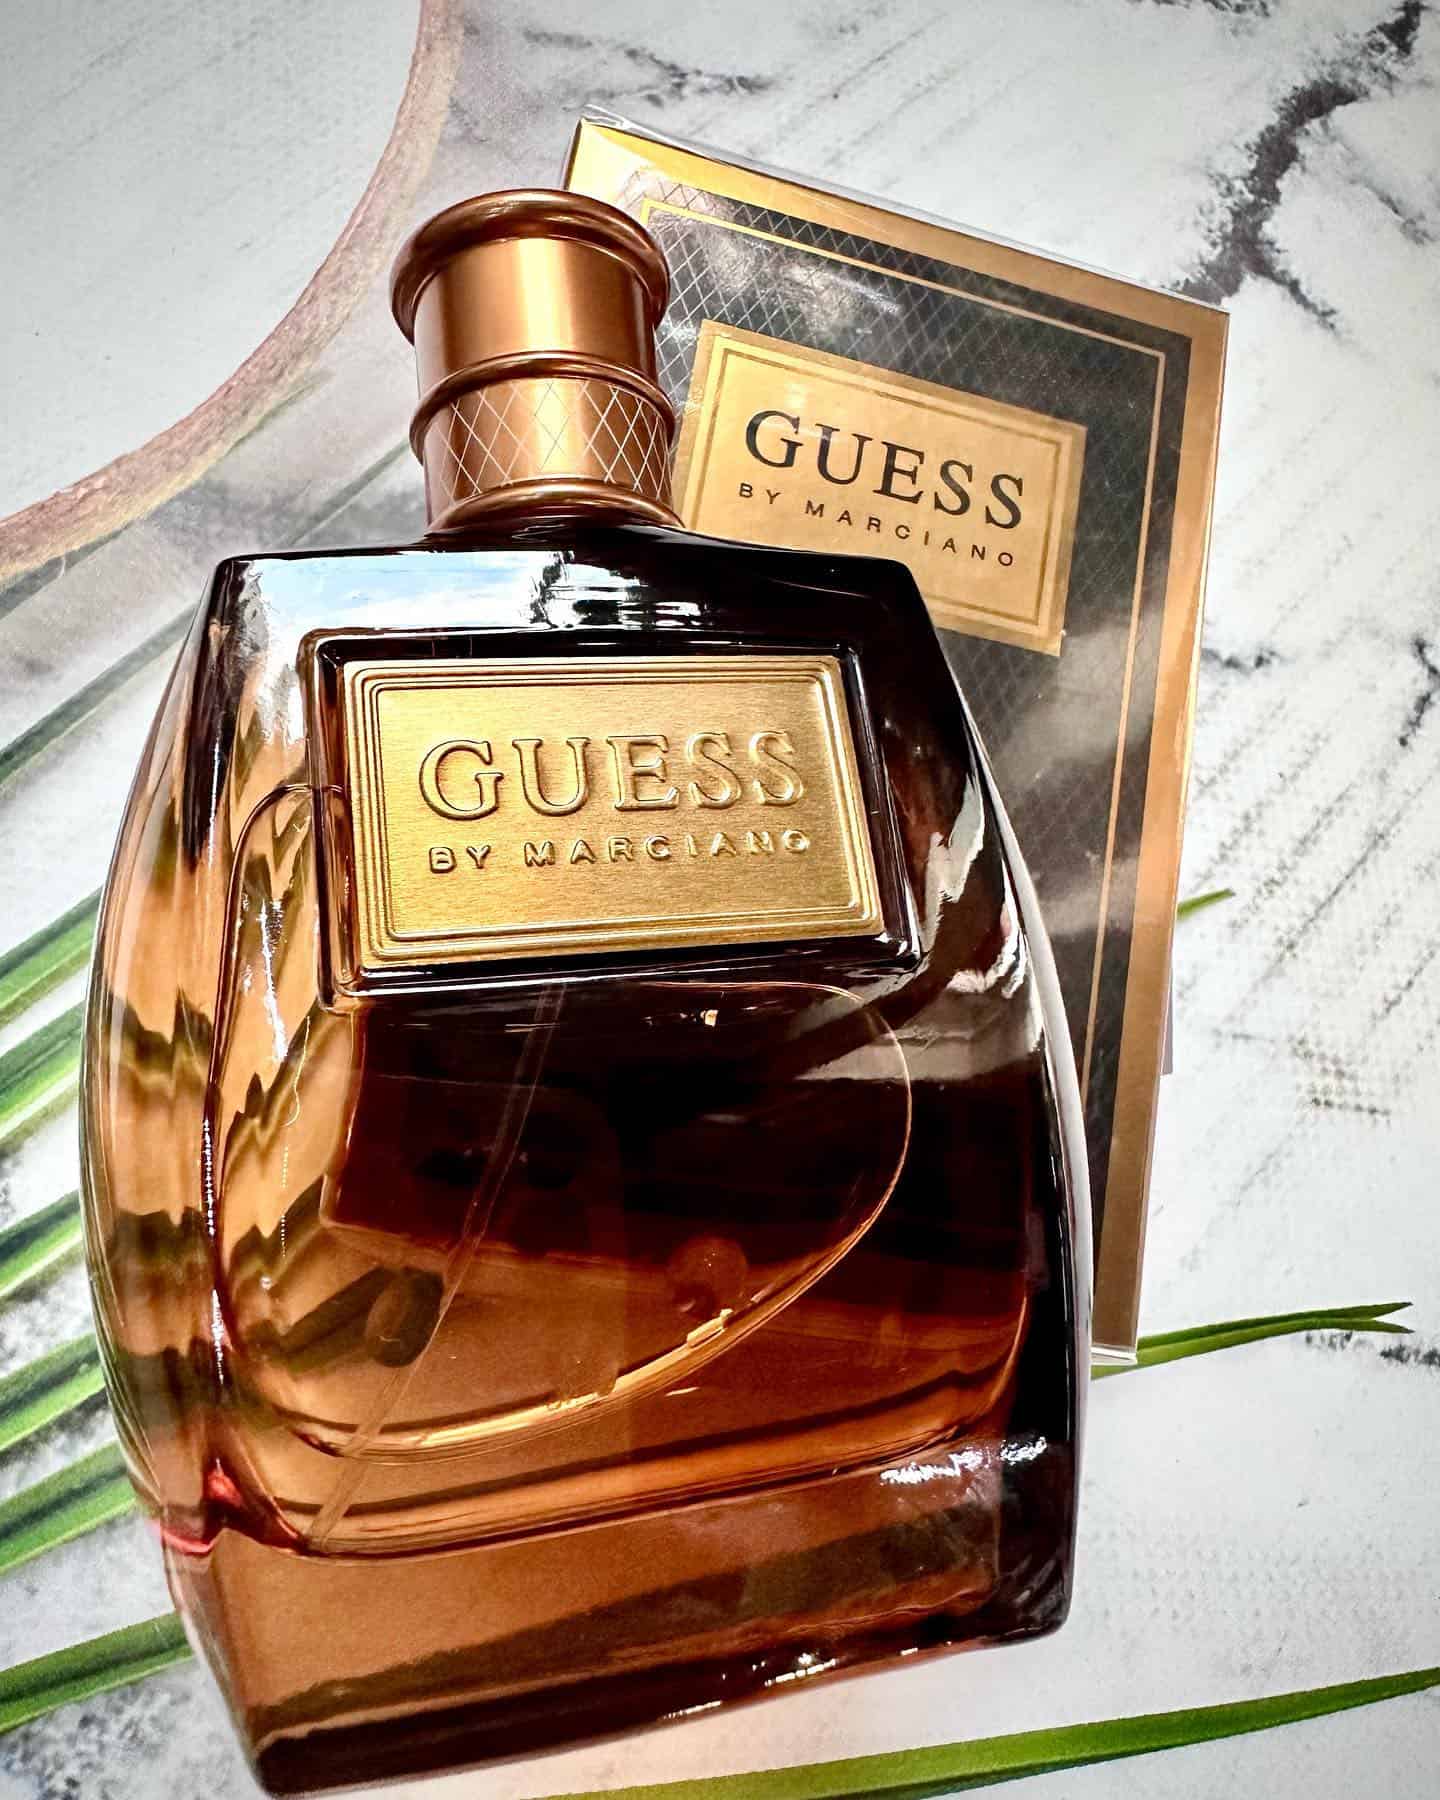 a bottle of marciano cologne by guess